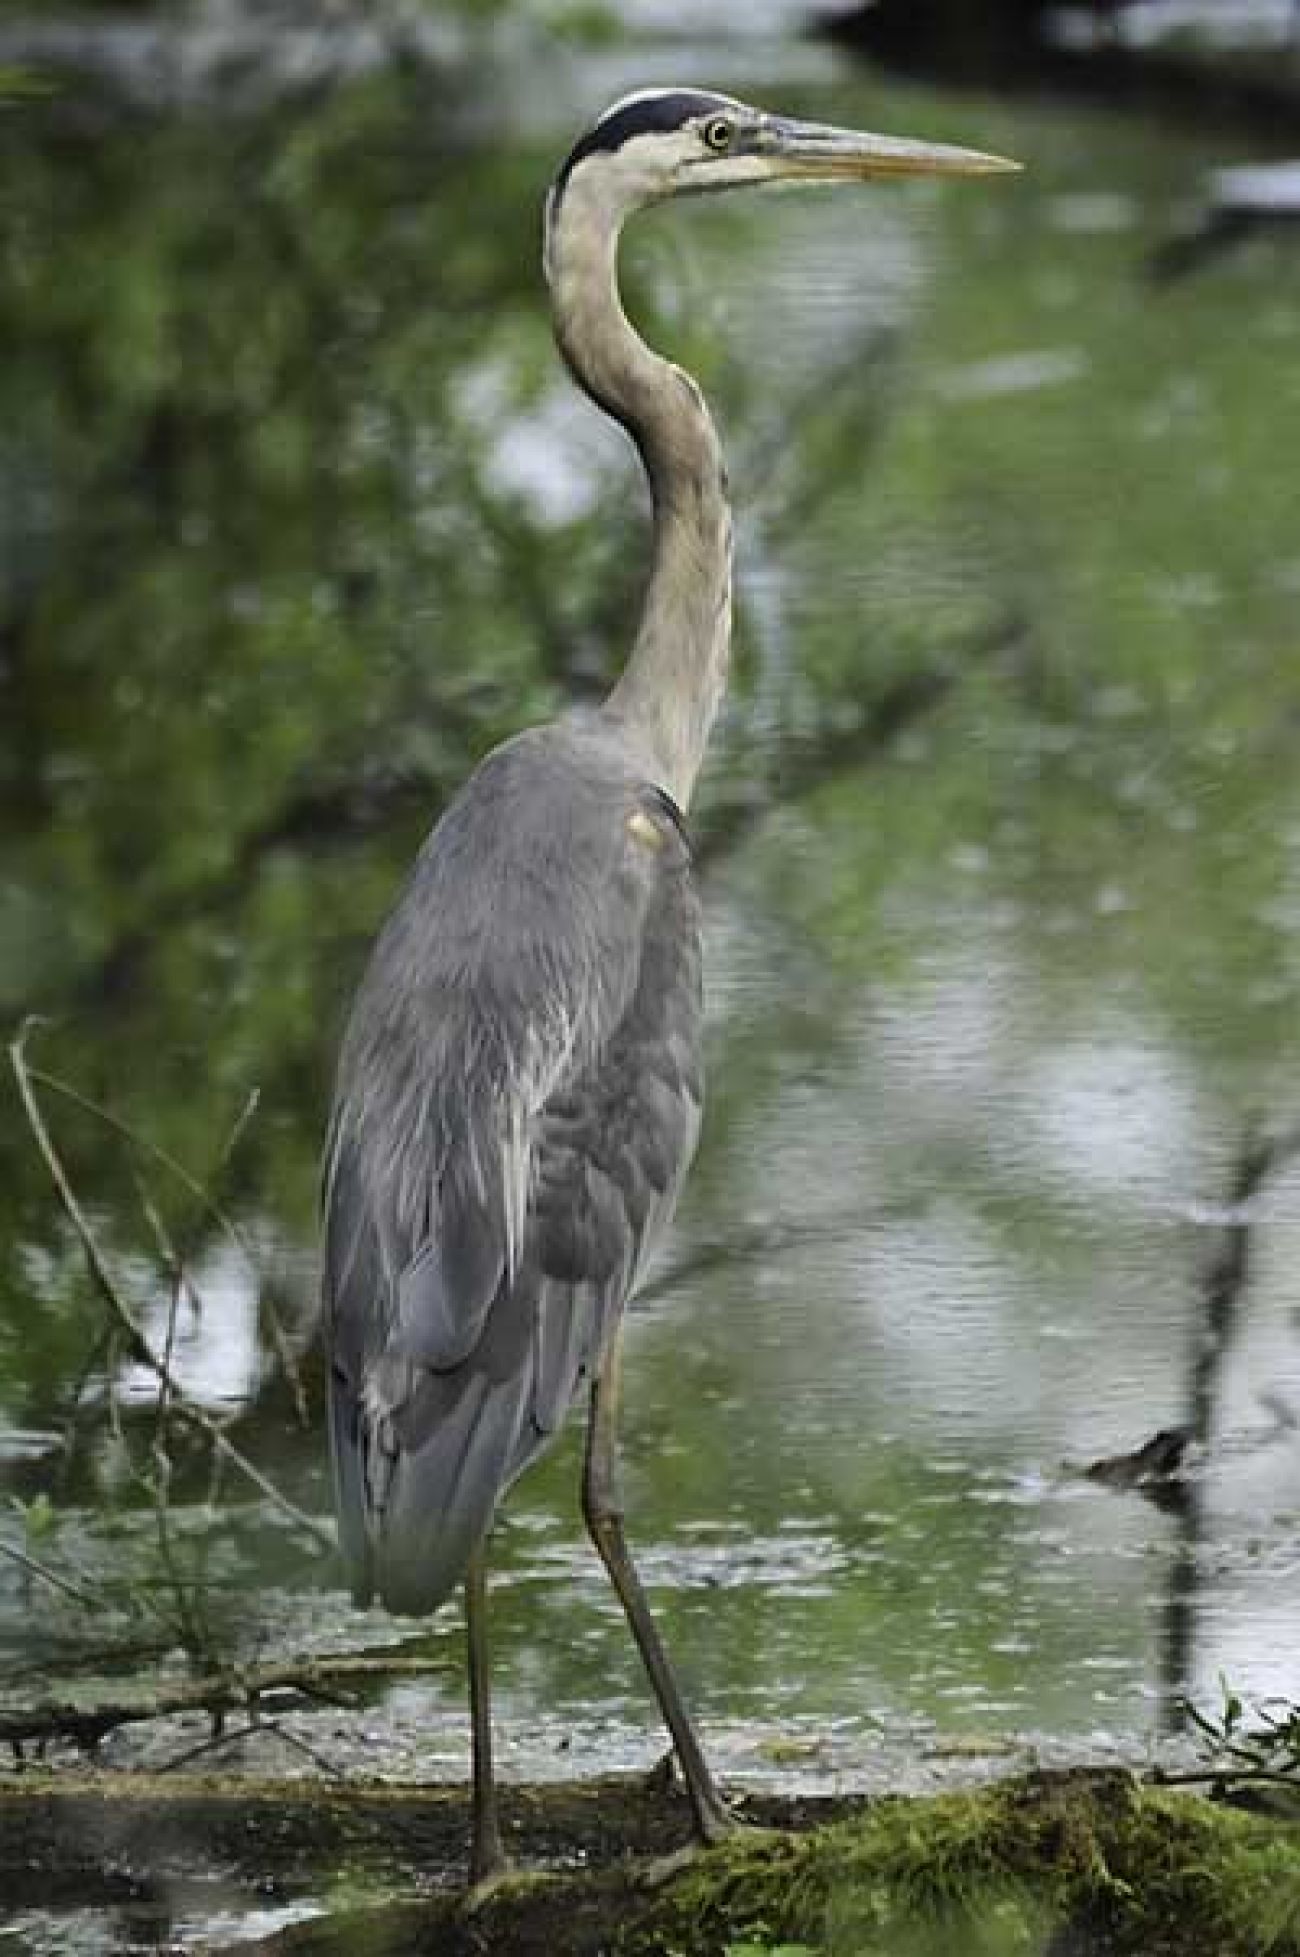 A great blue heron on the banks of the River Raisin.